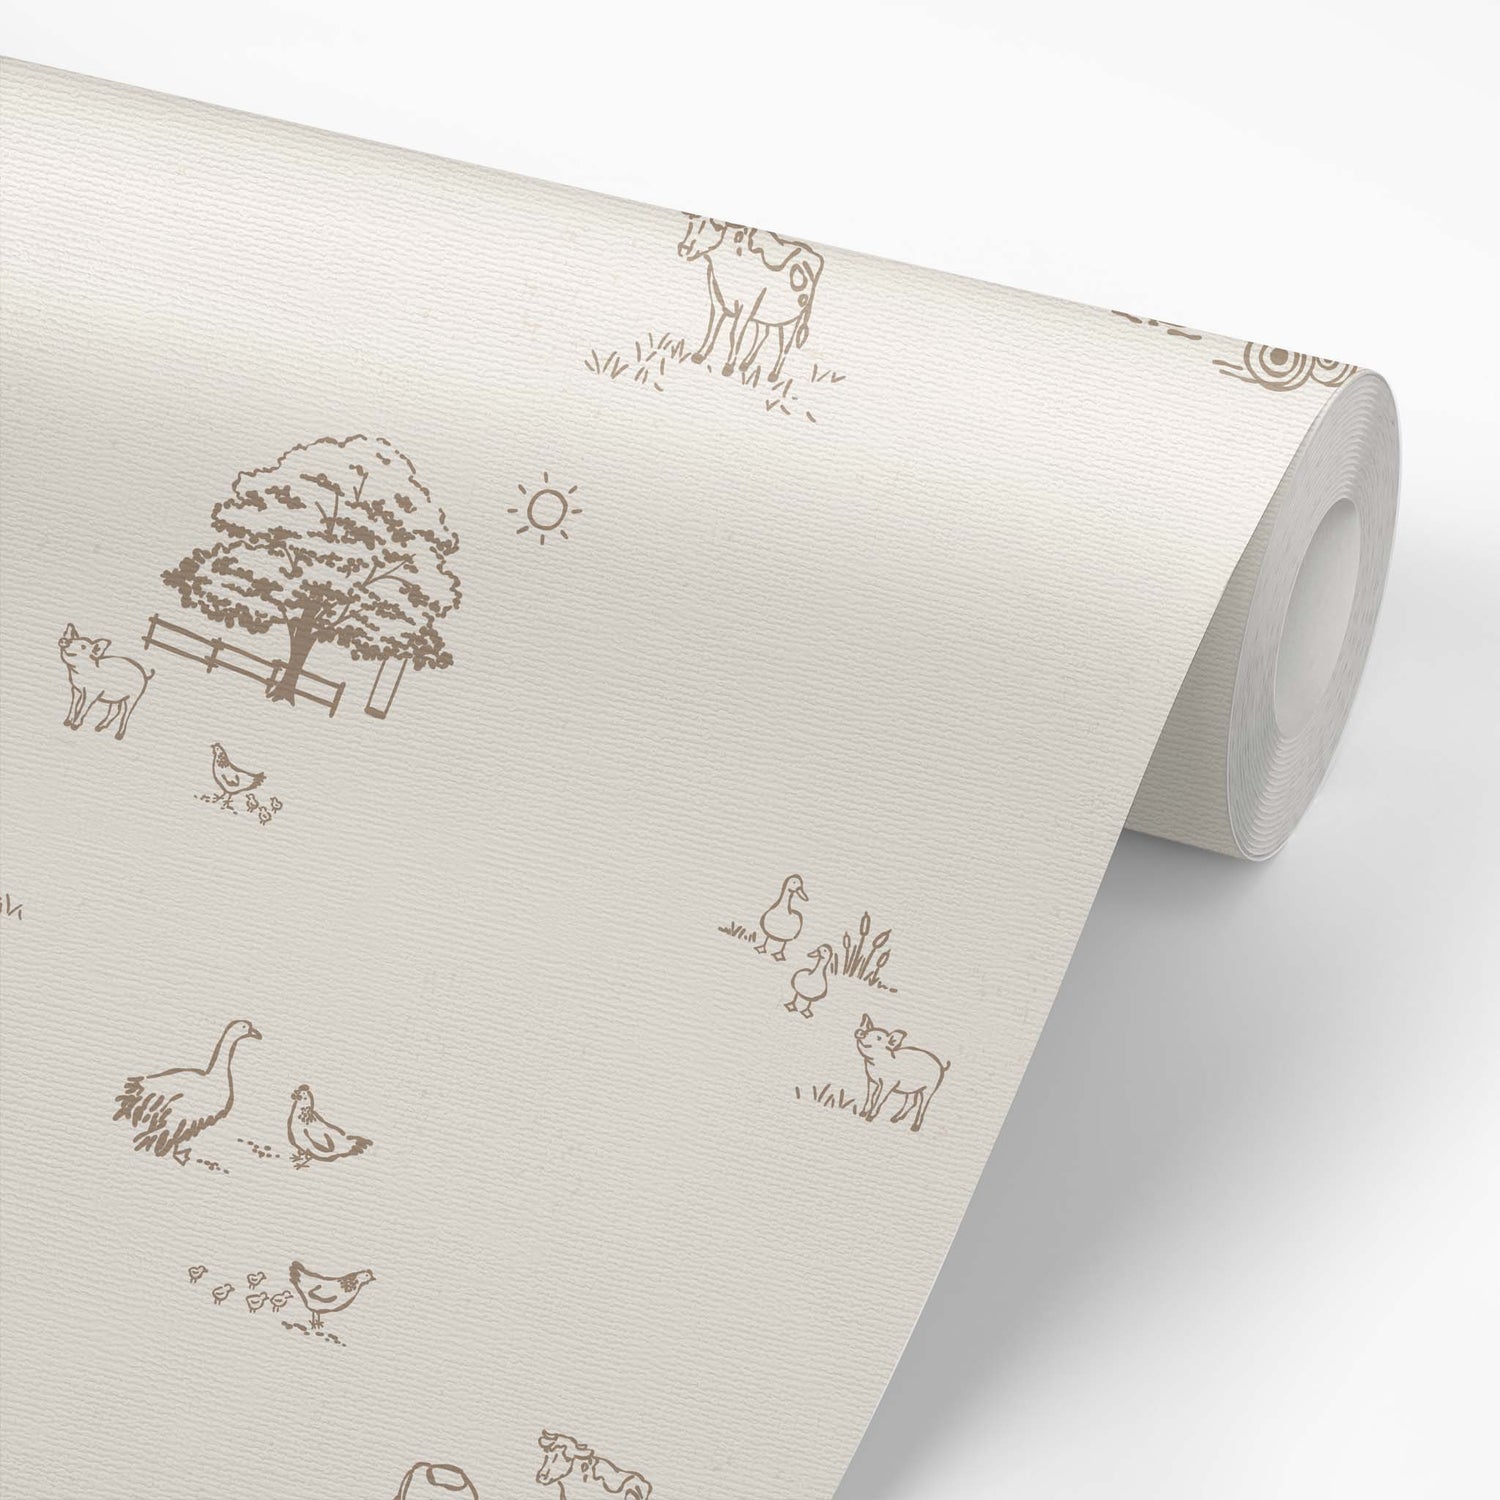 This wallpaper roll shows our Country Farm Wallpaper in Brown. This peel and stick, removable wallpaper was designed by artist Mariah Cottrell and features farm animals and trees in a countryside scene.